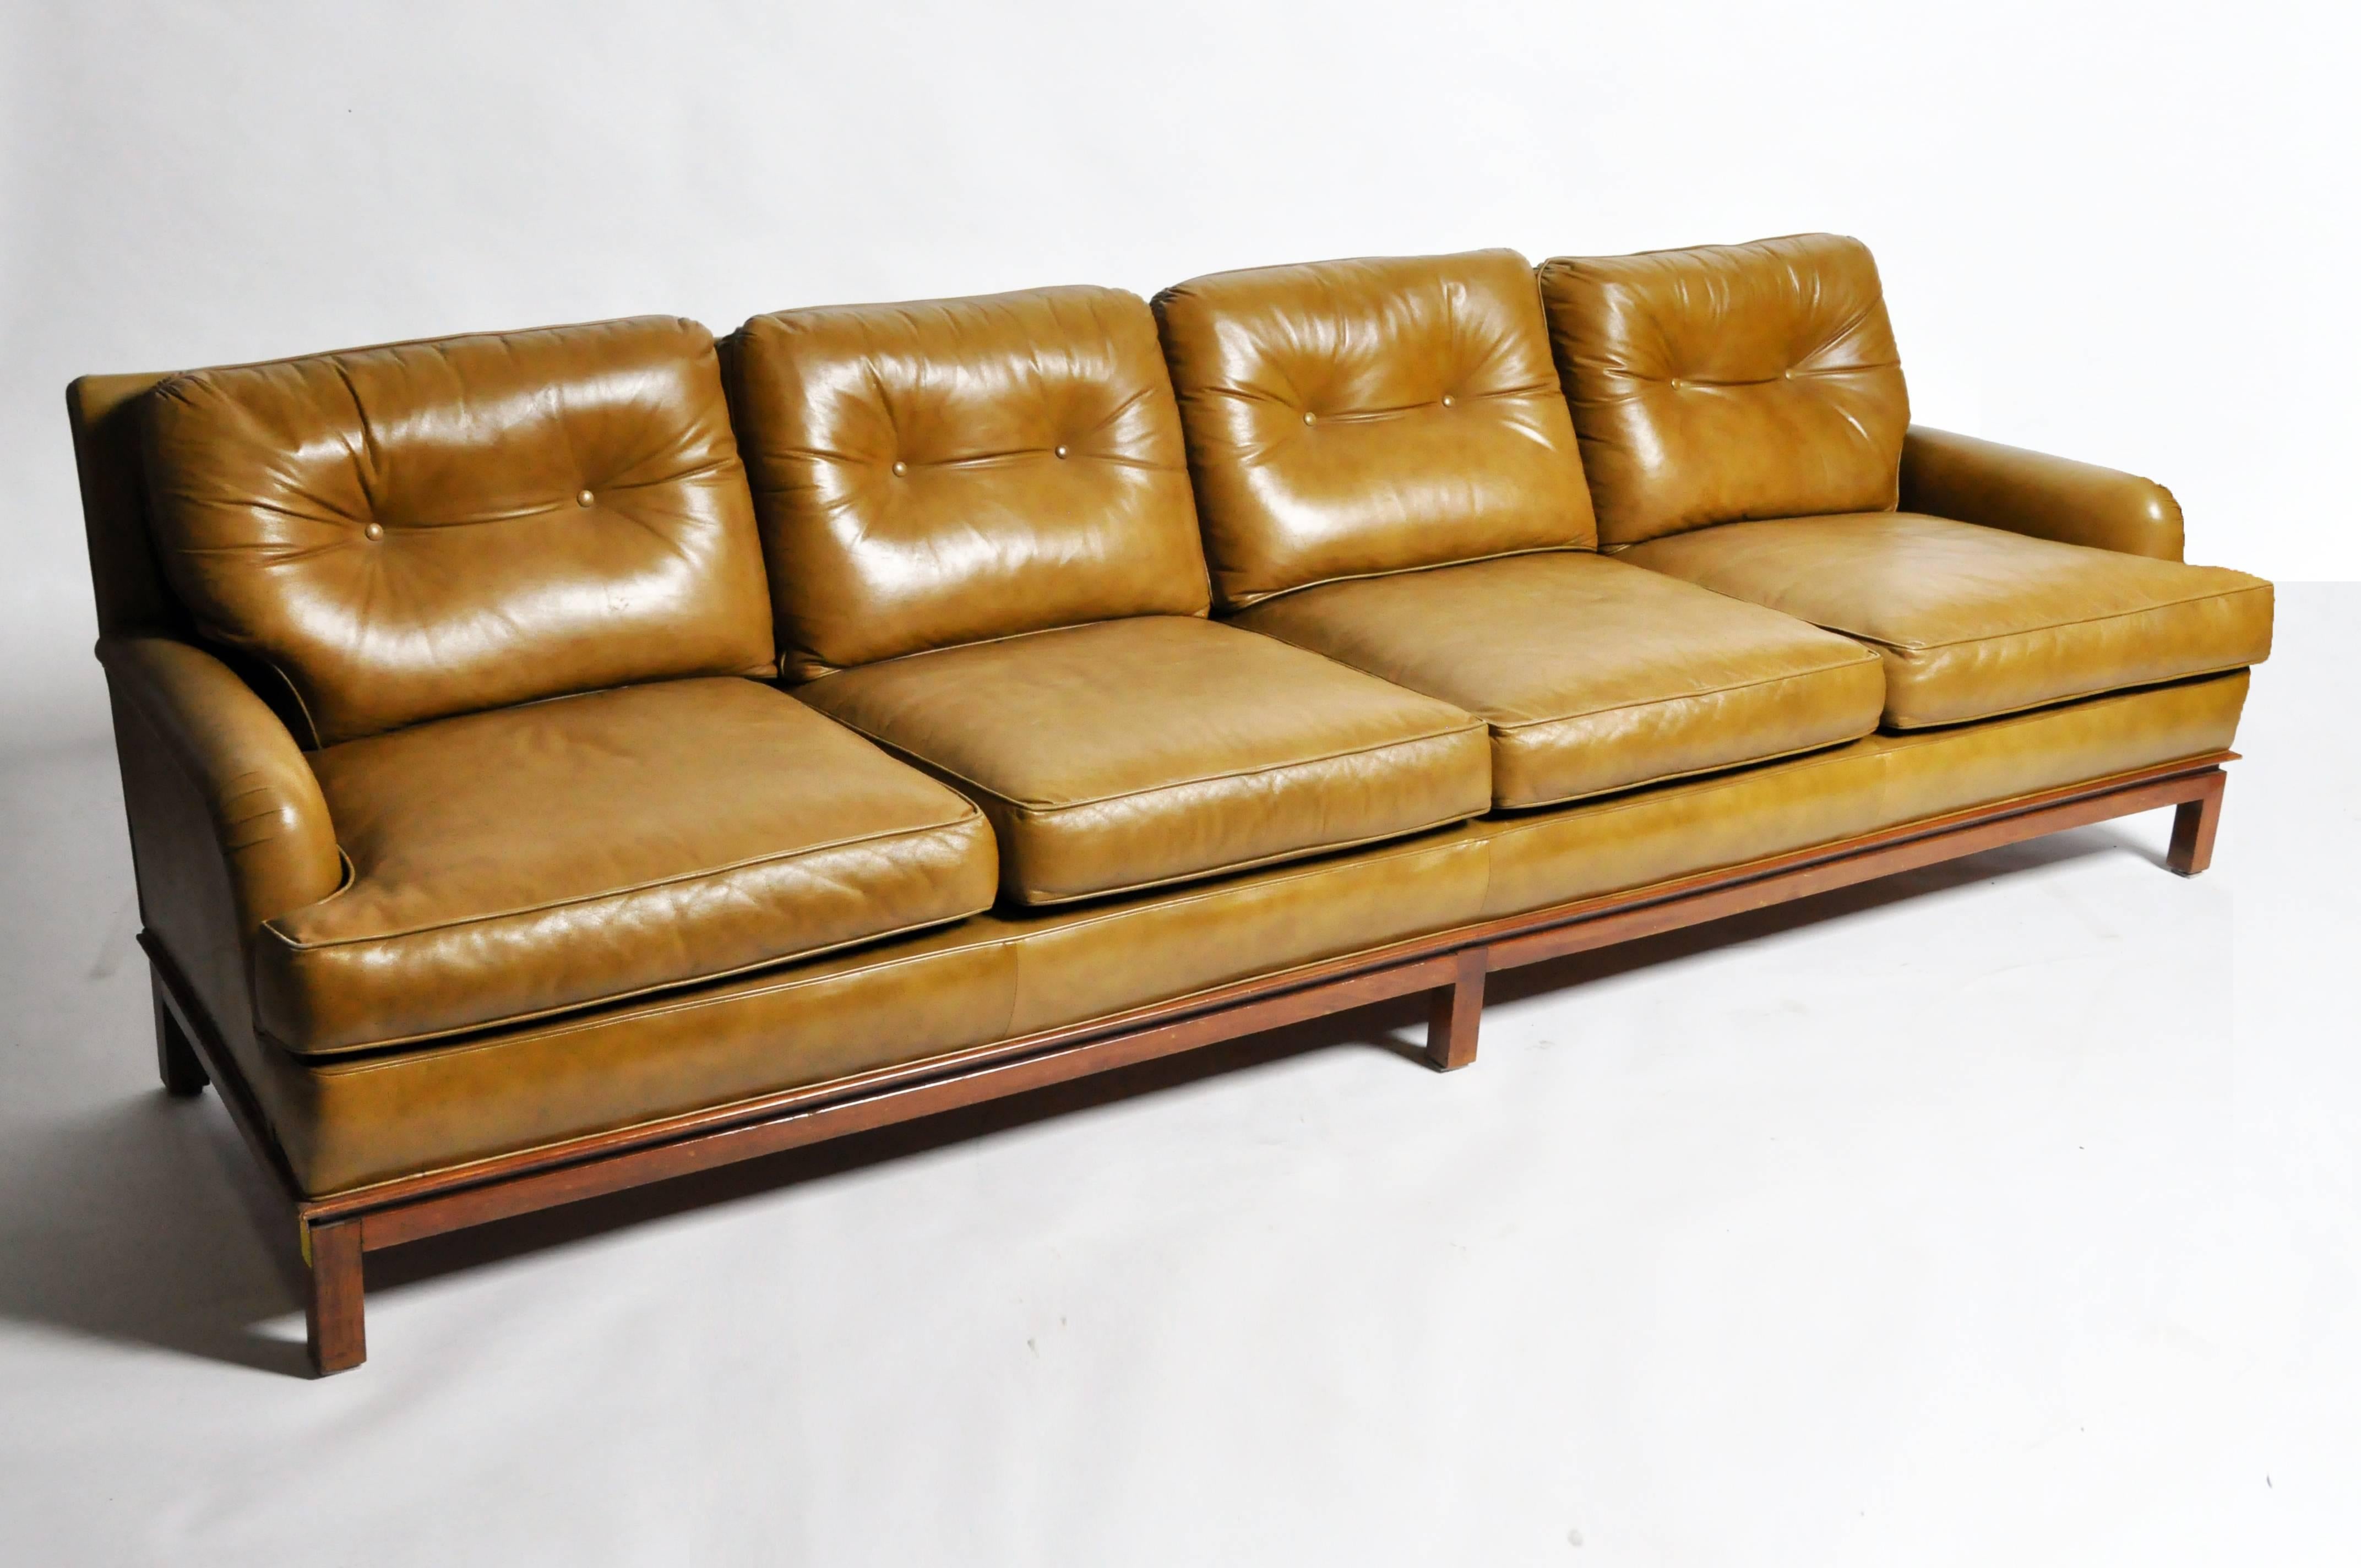 This handsome green leather sofa with hardwood base is from the United States and was designed in the style of Edward Wormley, circa 1960. Low-slung and highly comfortable, the sofa's wooden base gives it a strong visual presence that is unusual in